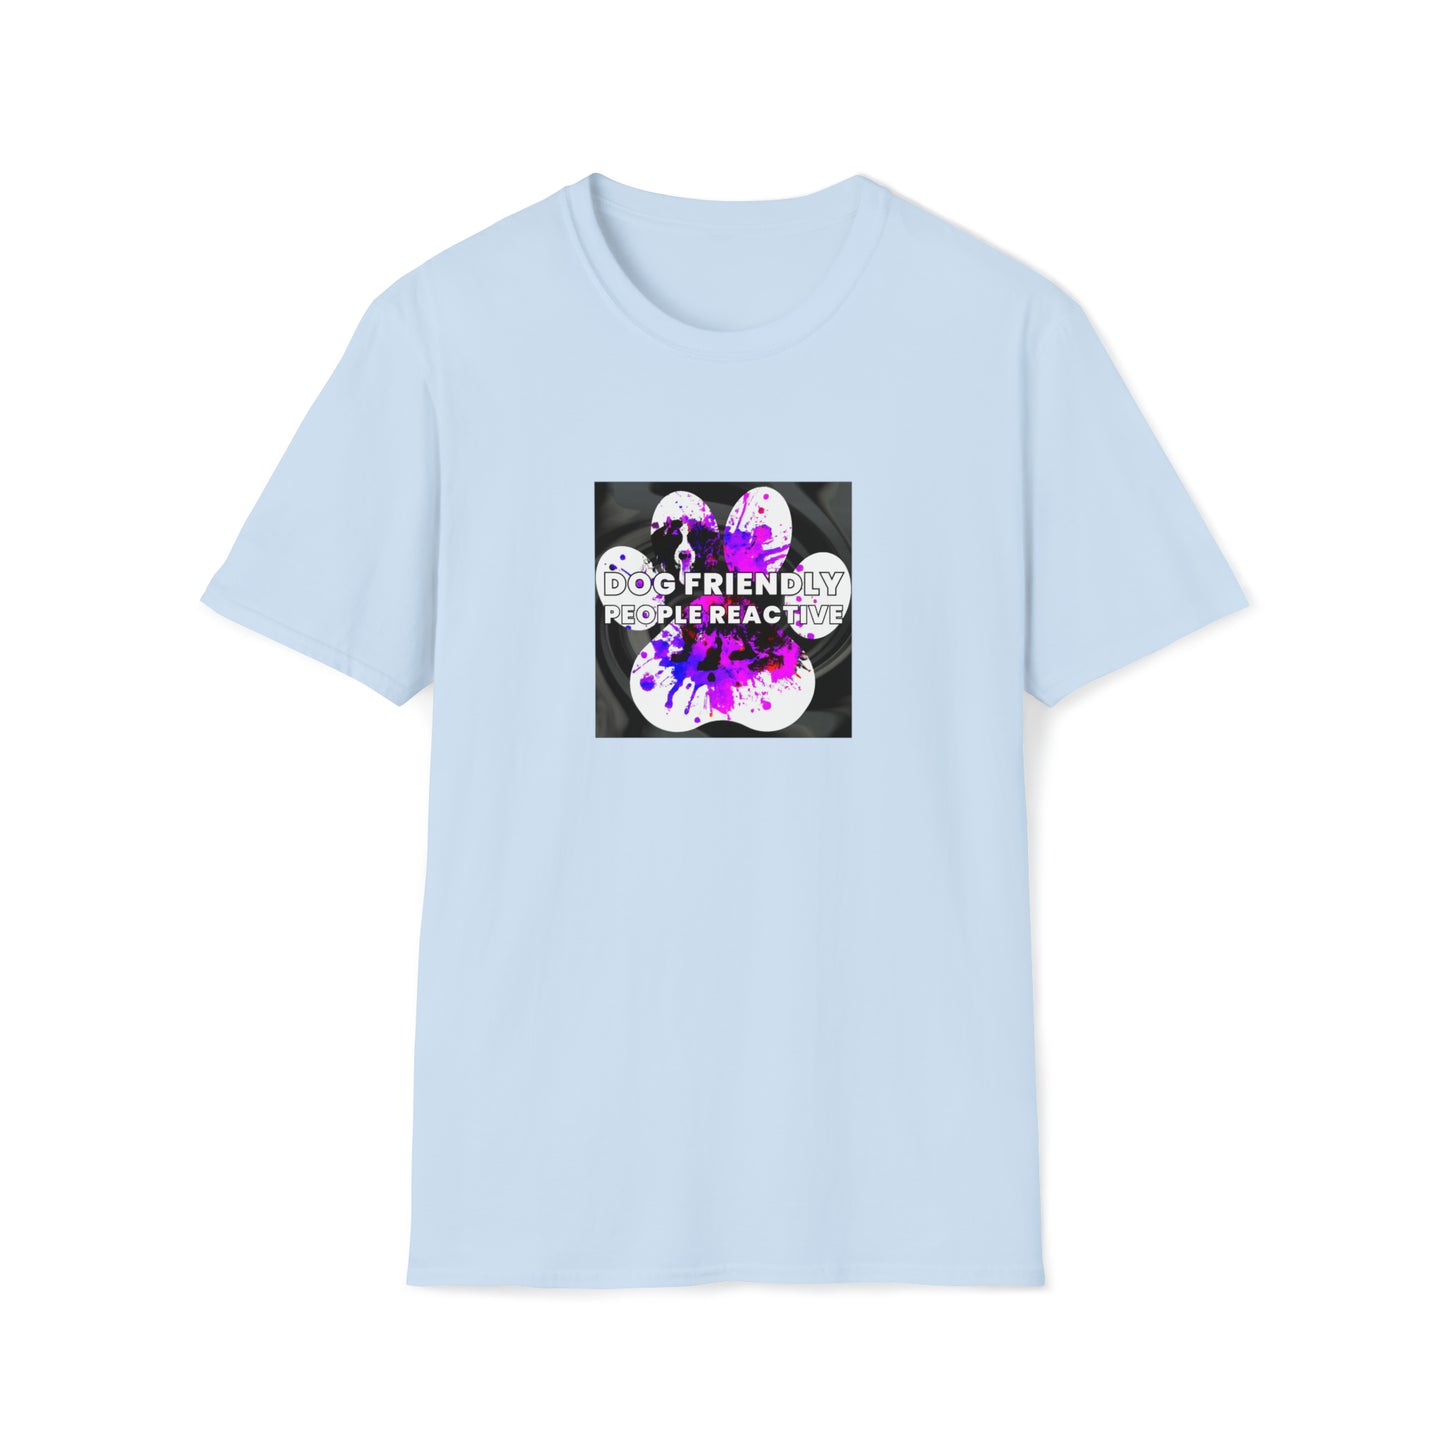 90's Street Swag Designer - "Girly G's Glam Swagg" - "Dog Friendly, People Reactive" Unisex Tee